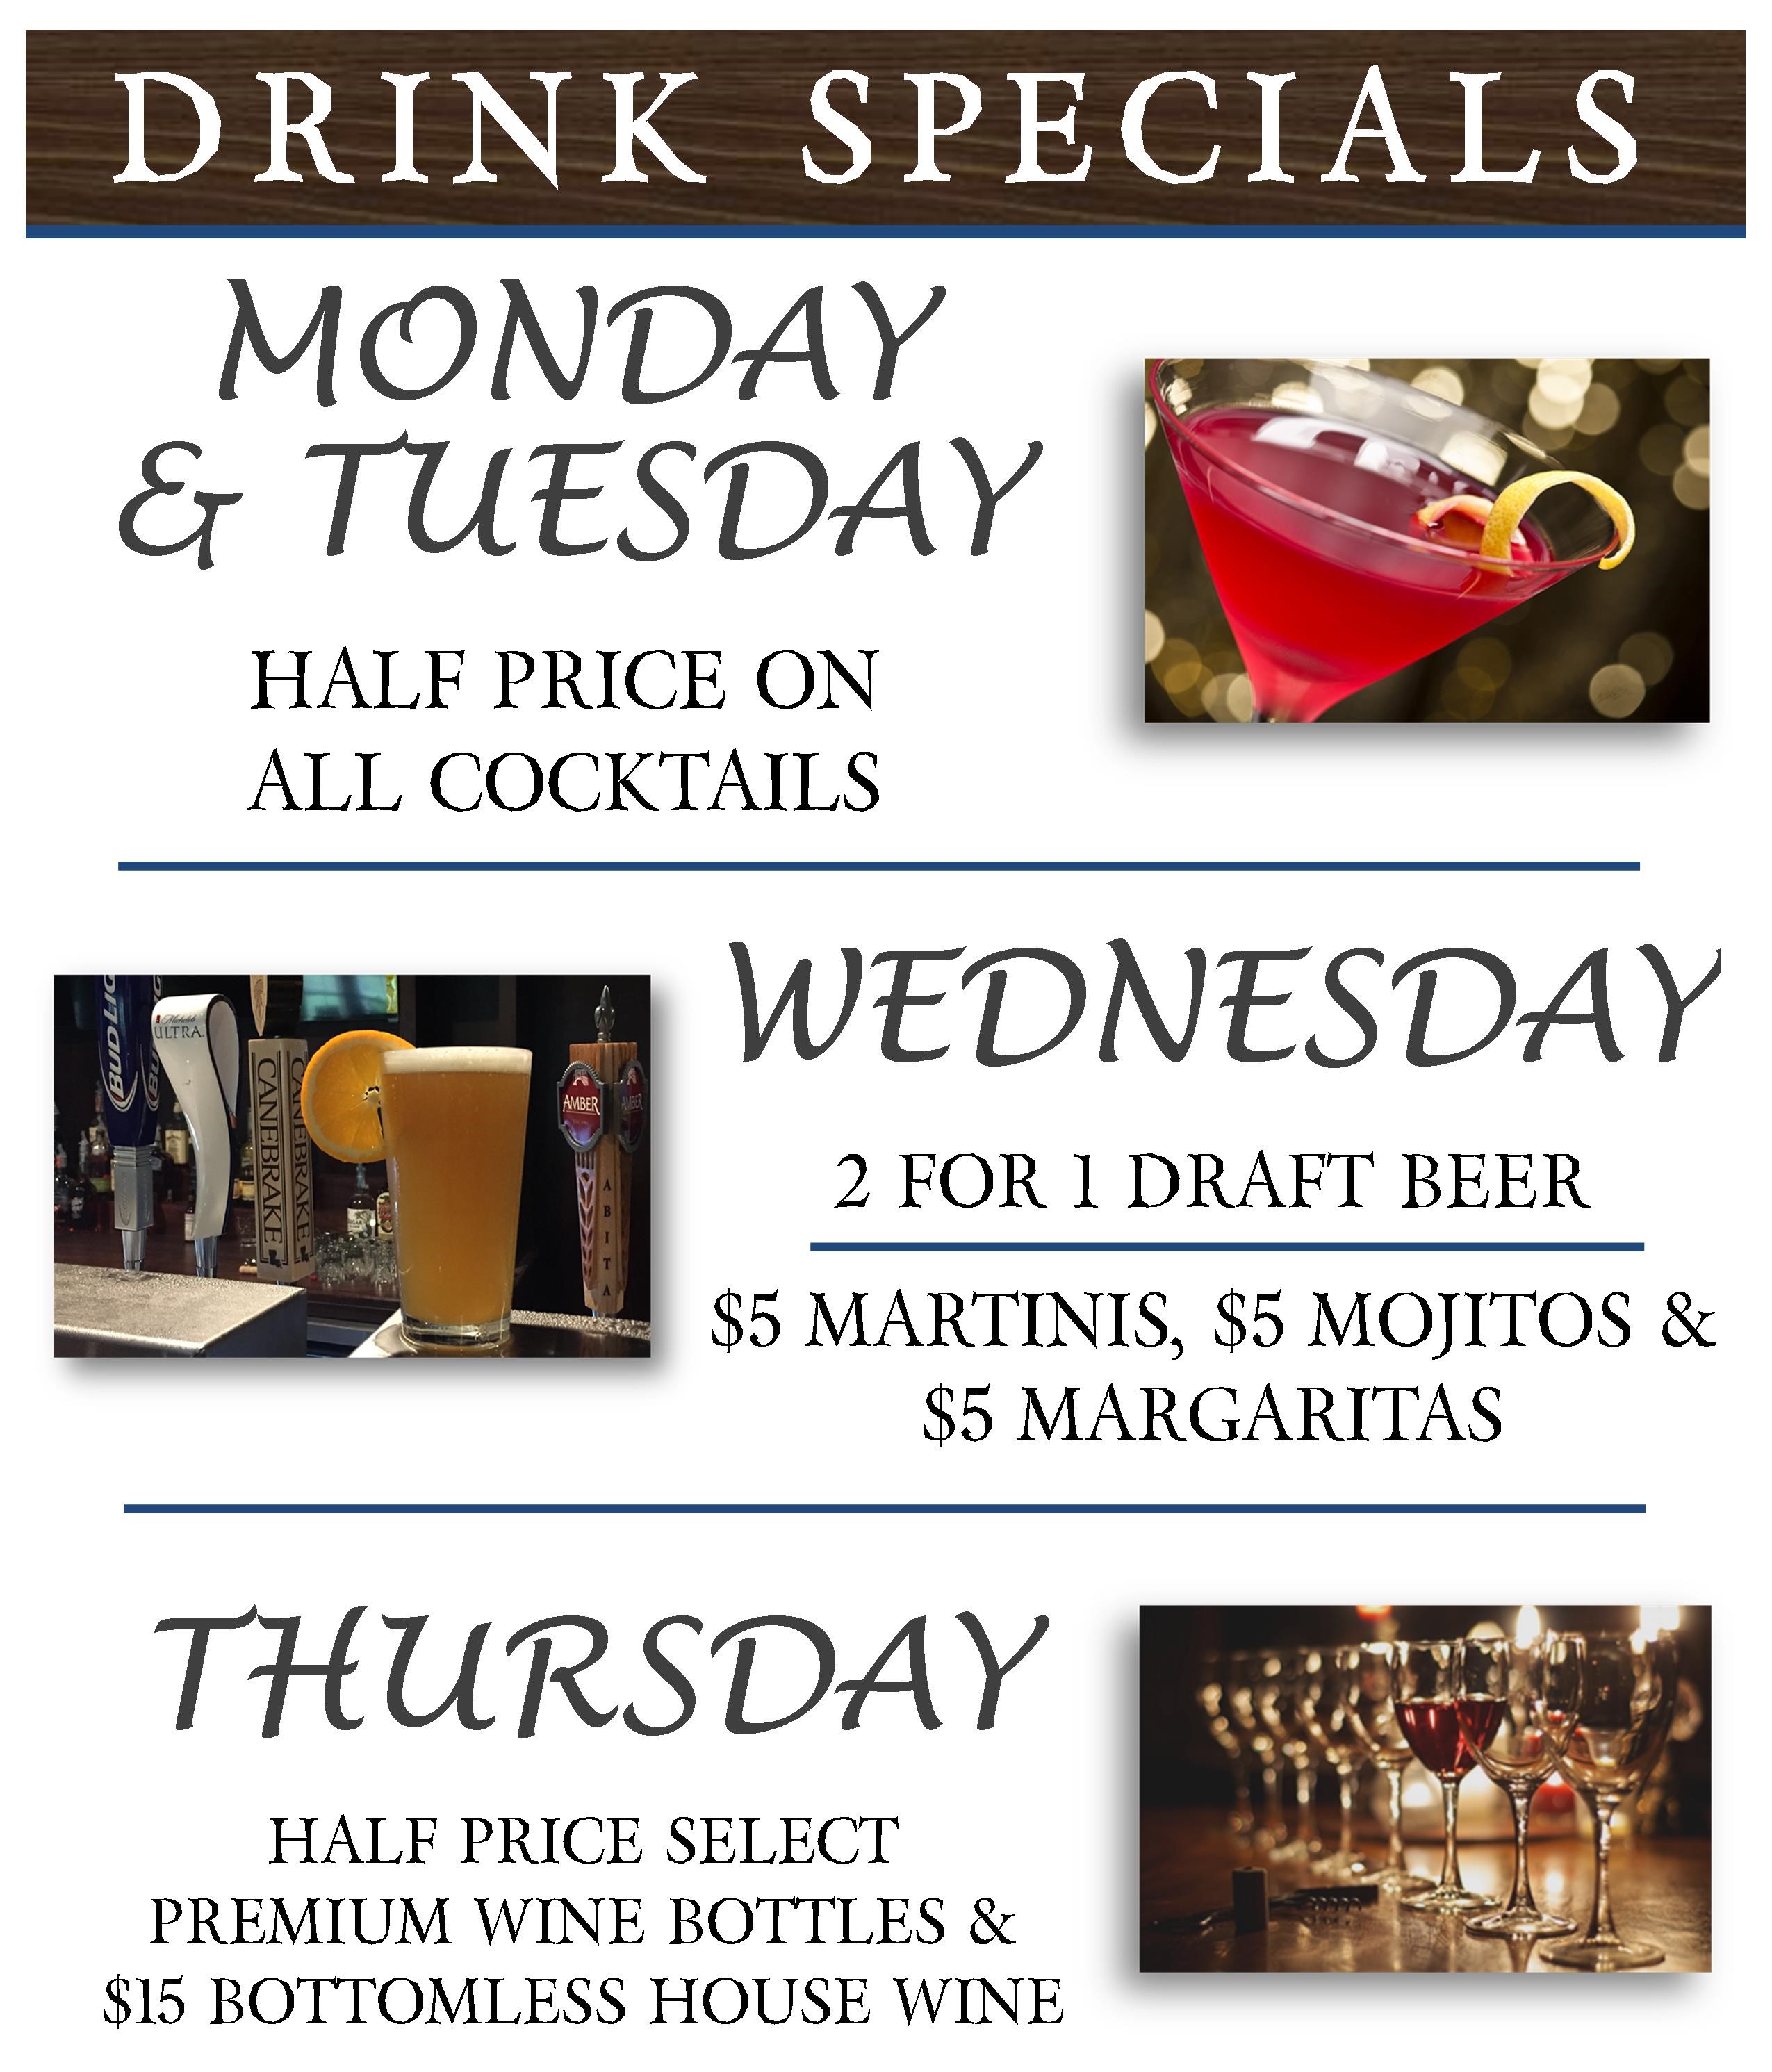 Affordable drink specials